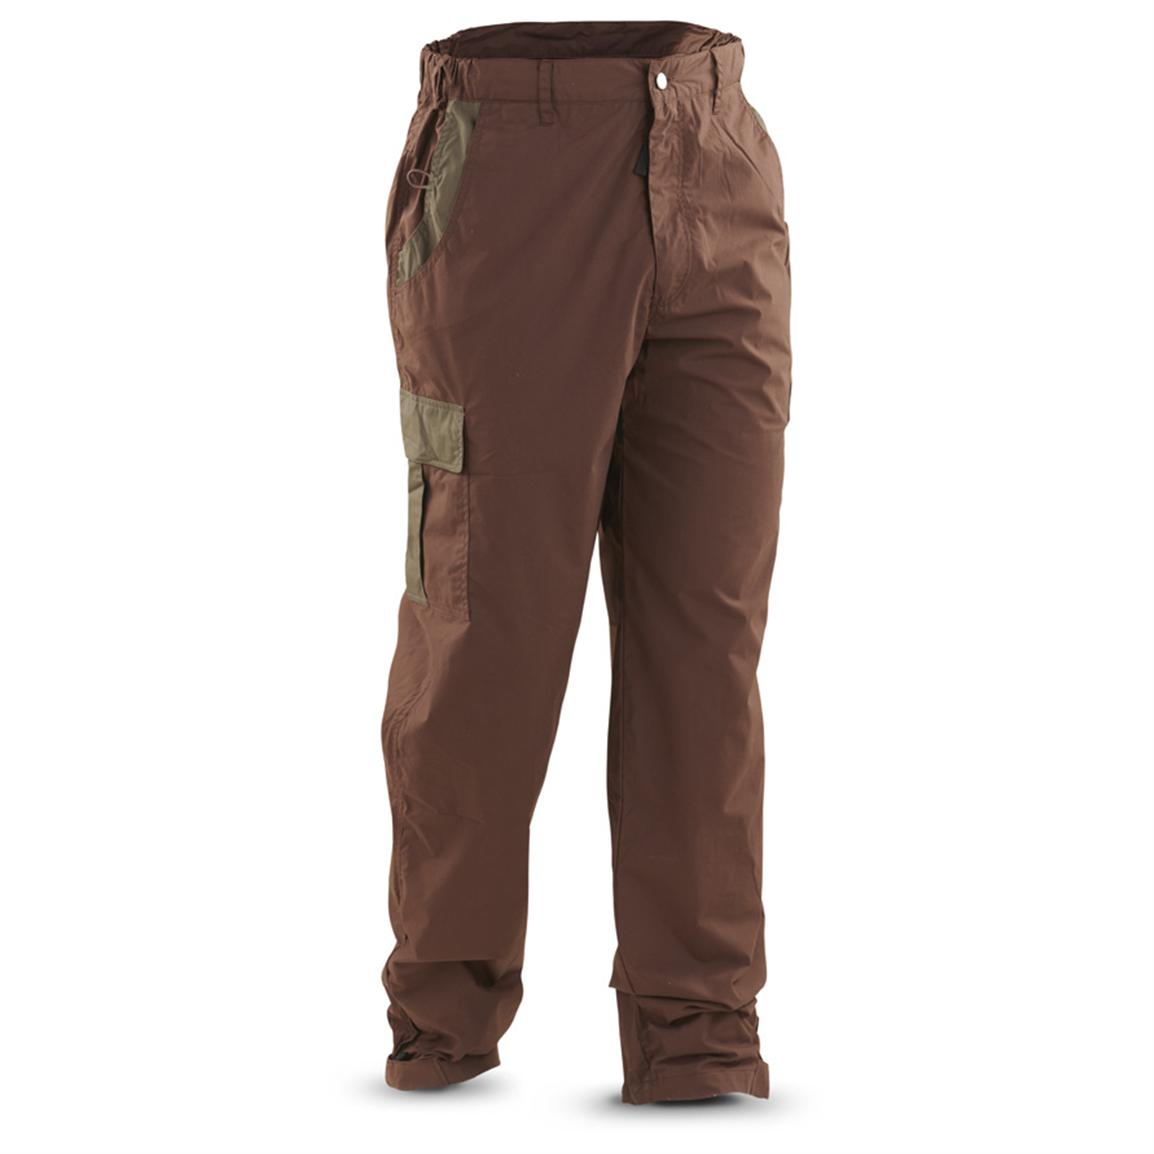 Men's Wild Hare® Outdoor Pants - 235969, Jeans & Pants at Sportsman's Guide